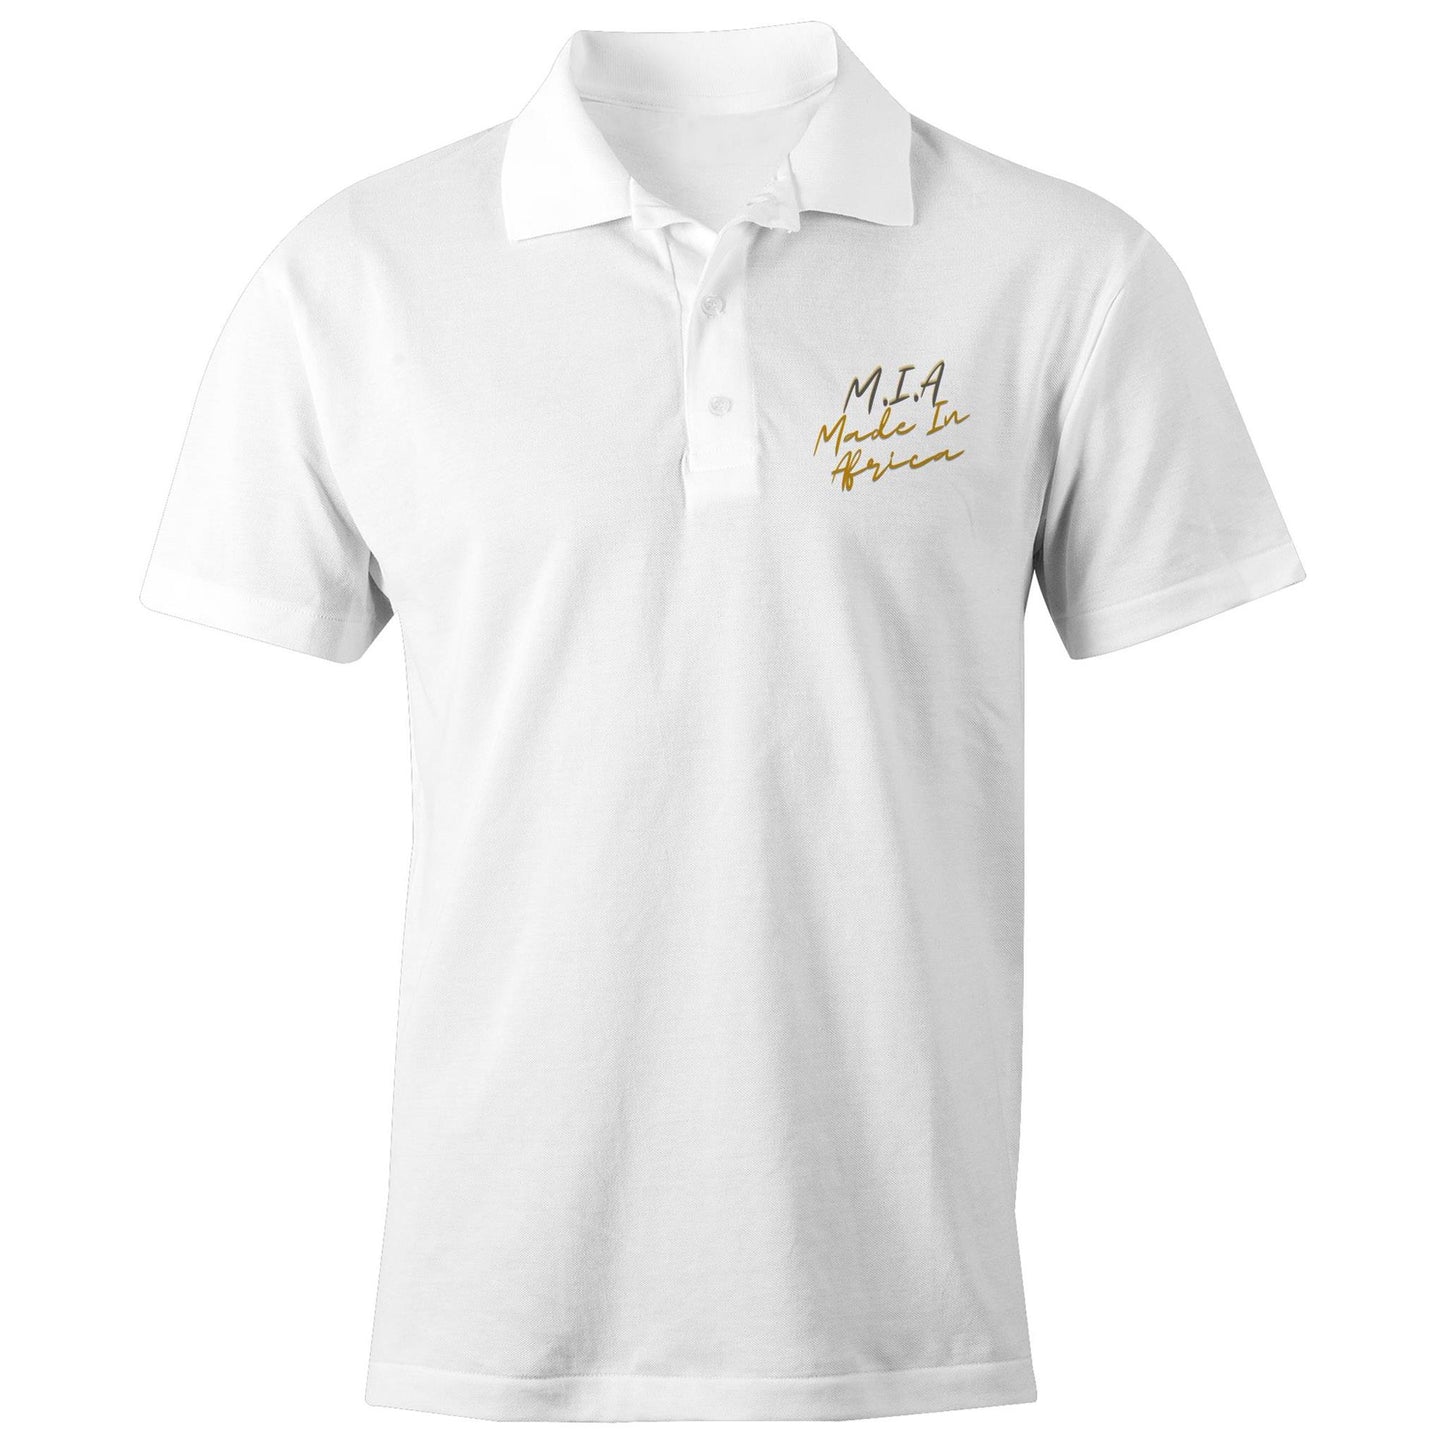 Made In Africa Men's Polo Shirt